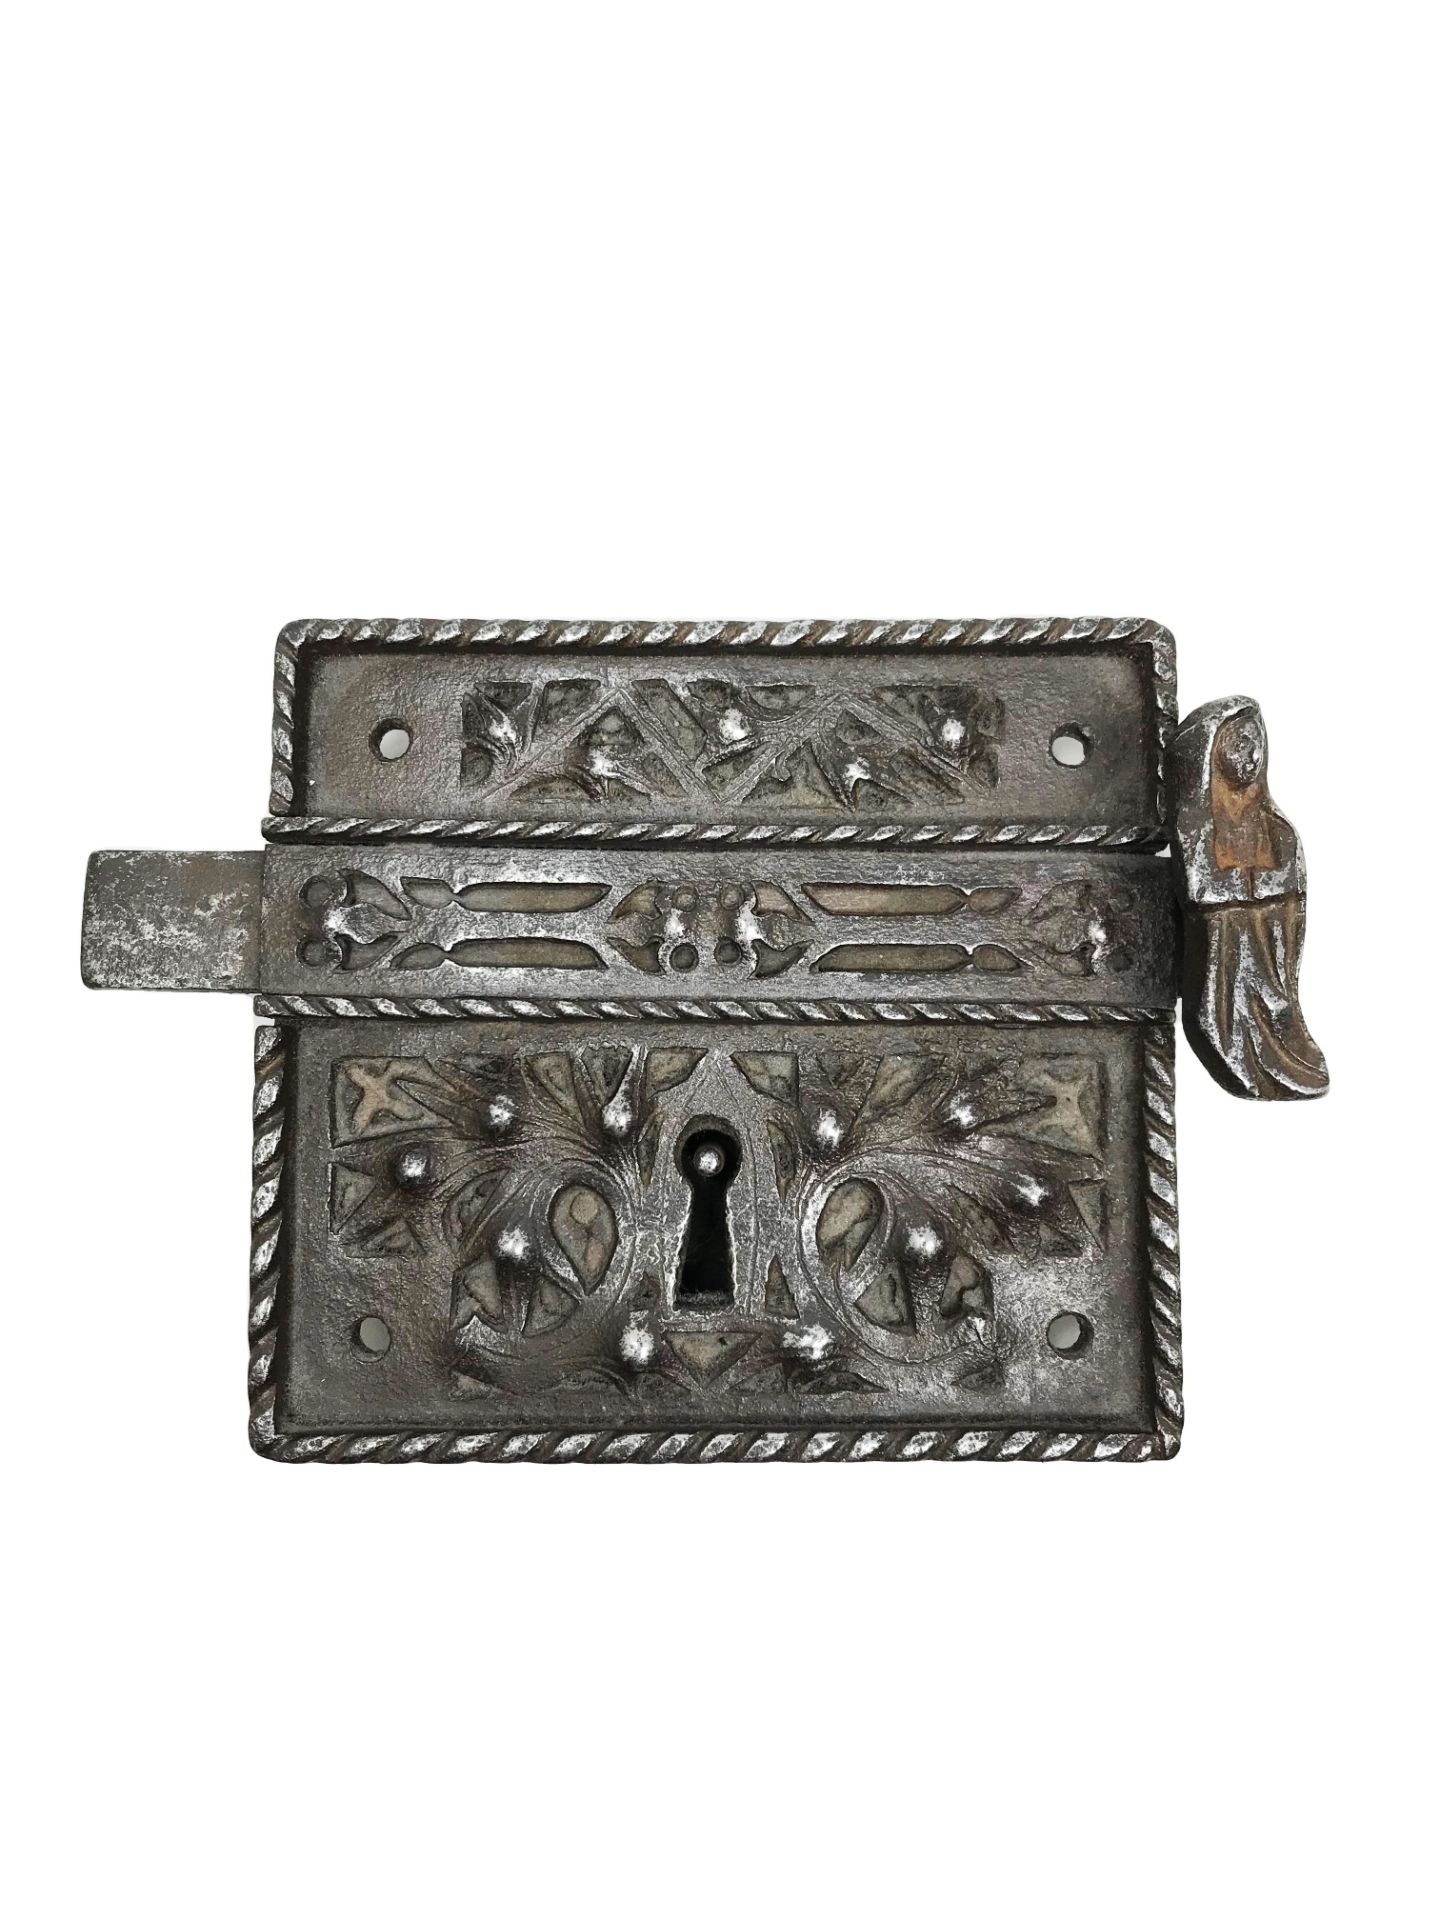 Medieval lock, the plate pierced with thistles, twisted frame, pierced bolt guide, knob formed by